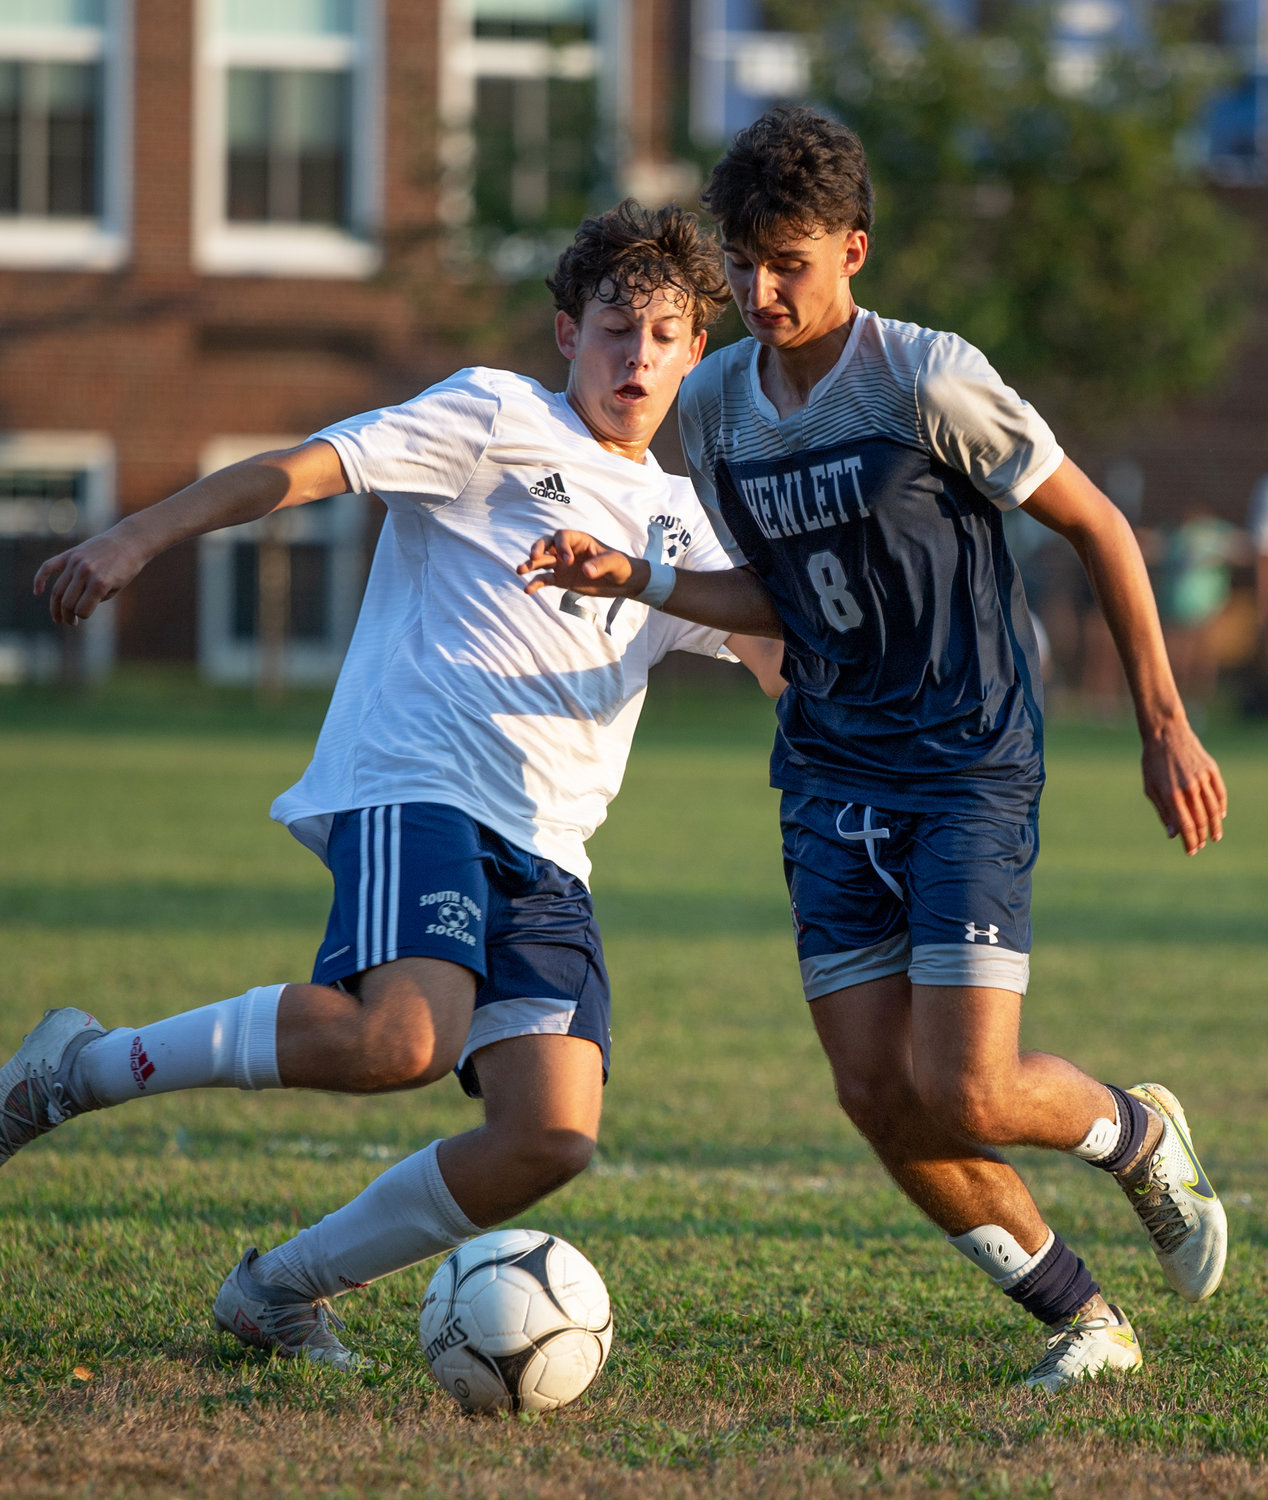 South Side’s Patrick Costello, left, and Hewlett’s Eric Riftin battled for control during a Conference A-Central matchup Sept. 14.